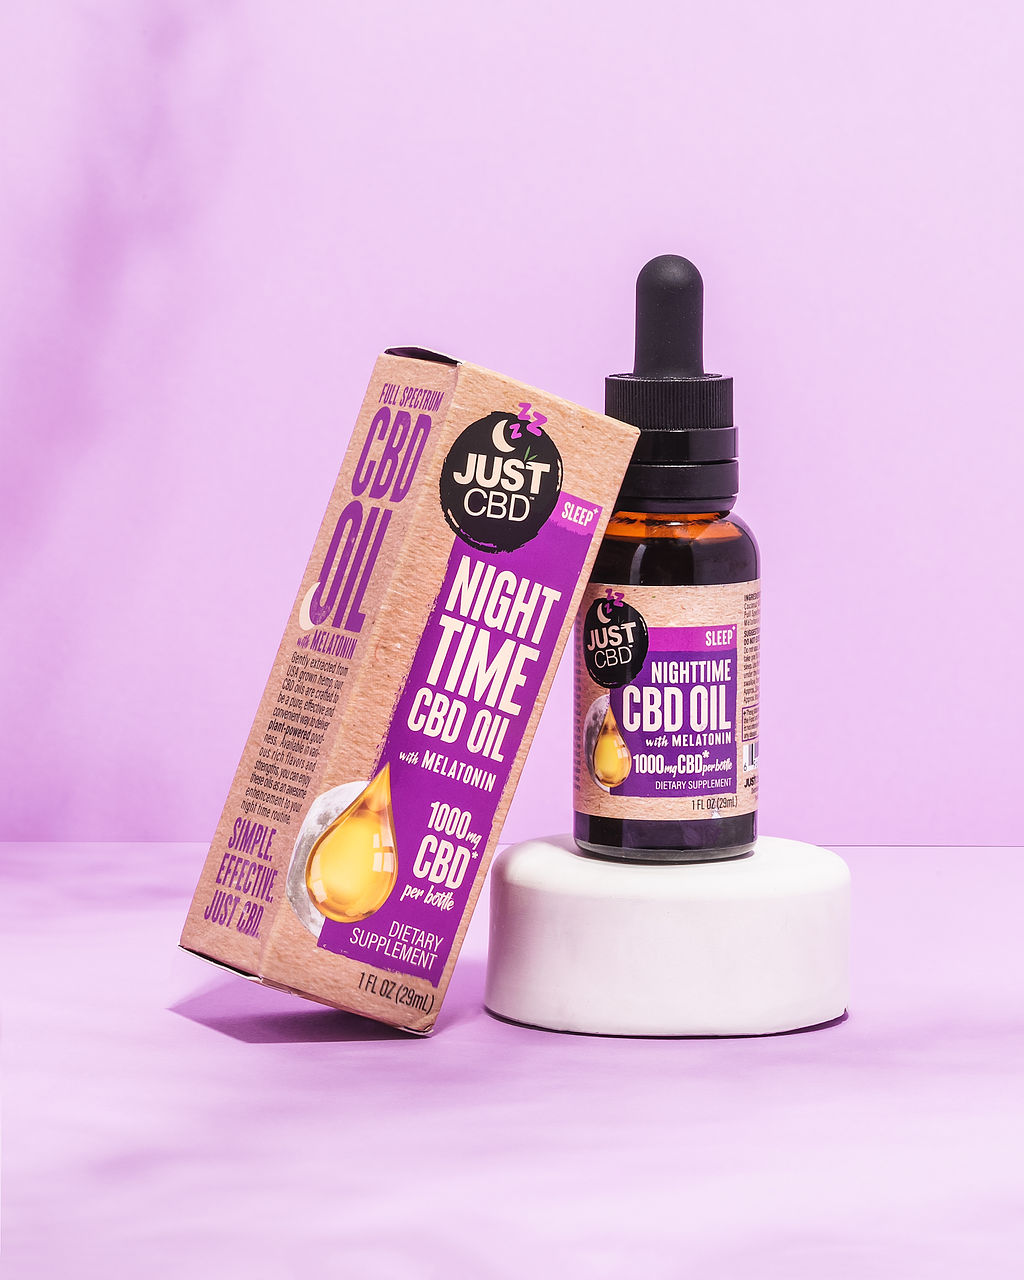 My CBD Tincture Adventure: A Fun and Honest Review of Just CBD’s Best Products